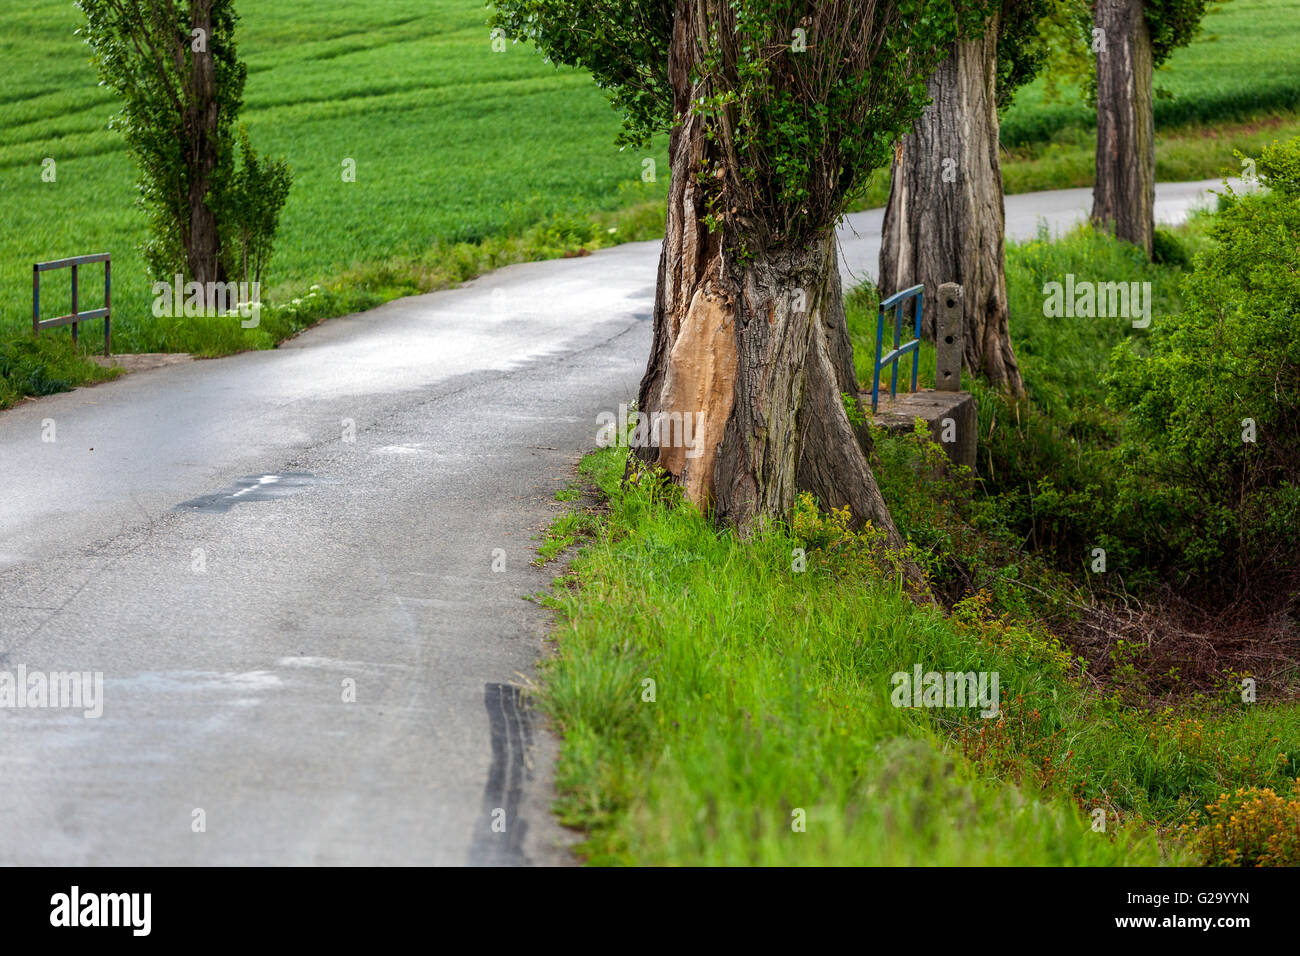 dangerously close to trees growing beside the road Stock Photo